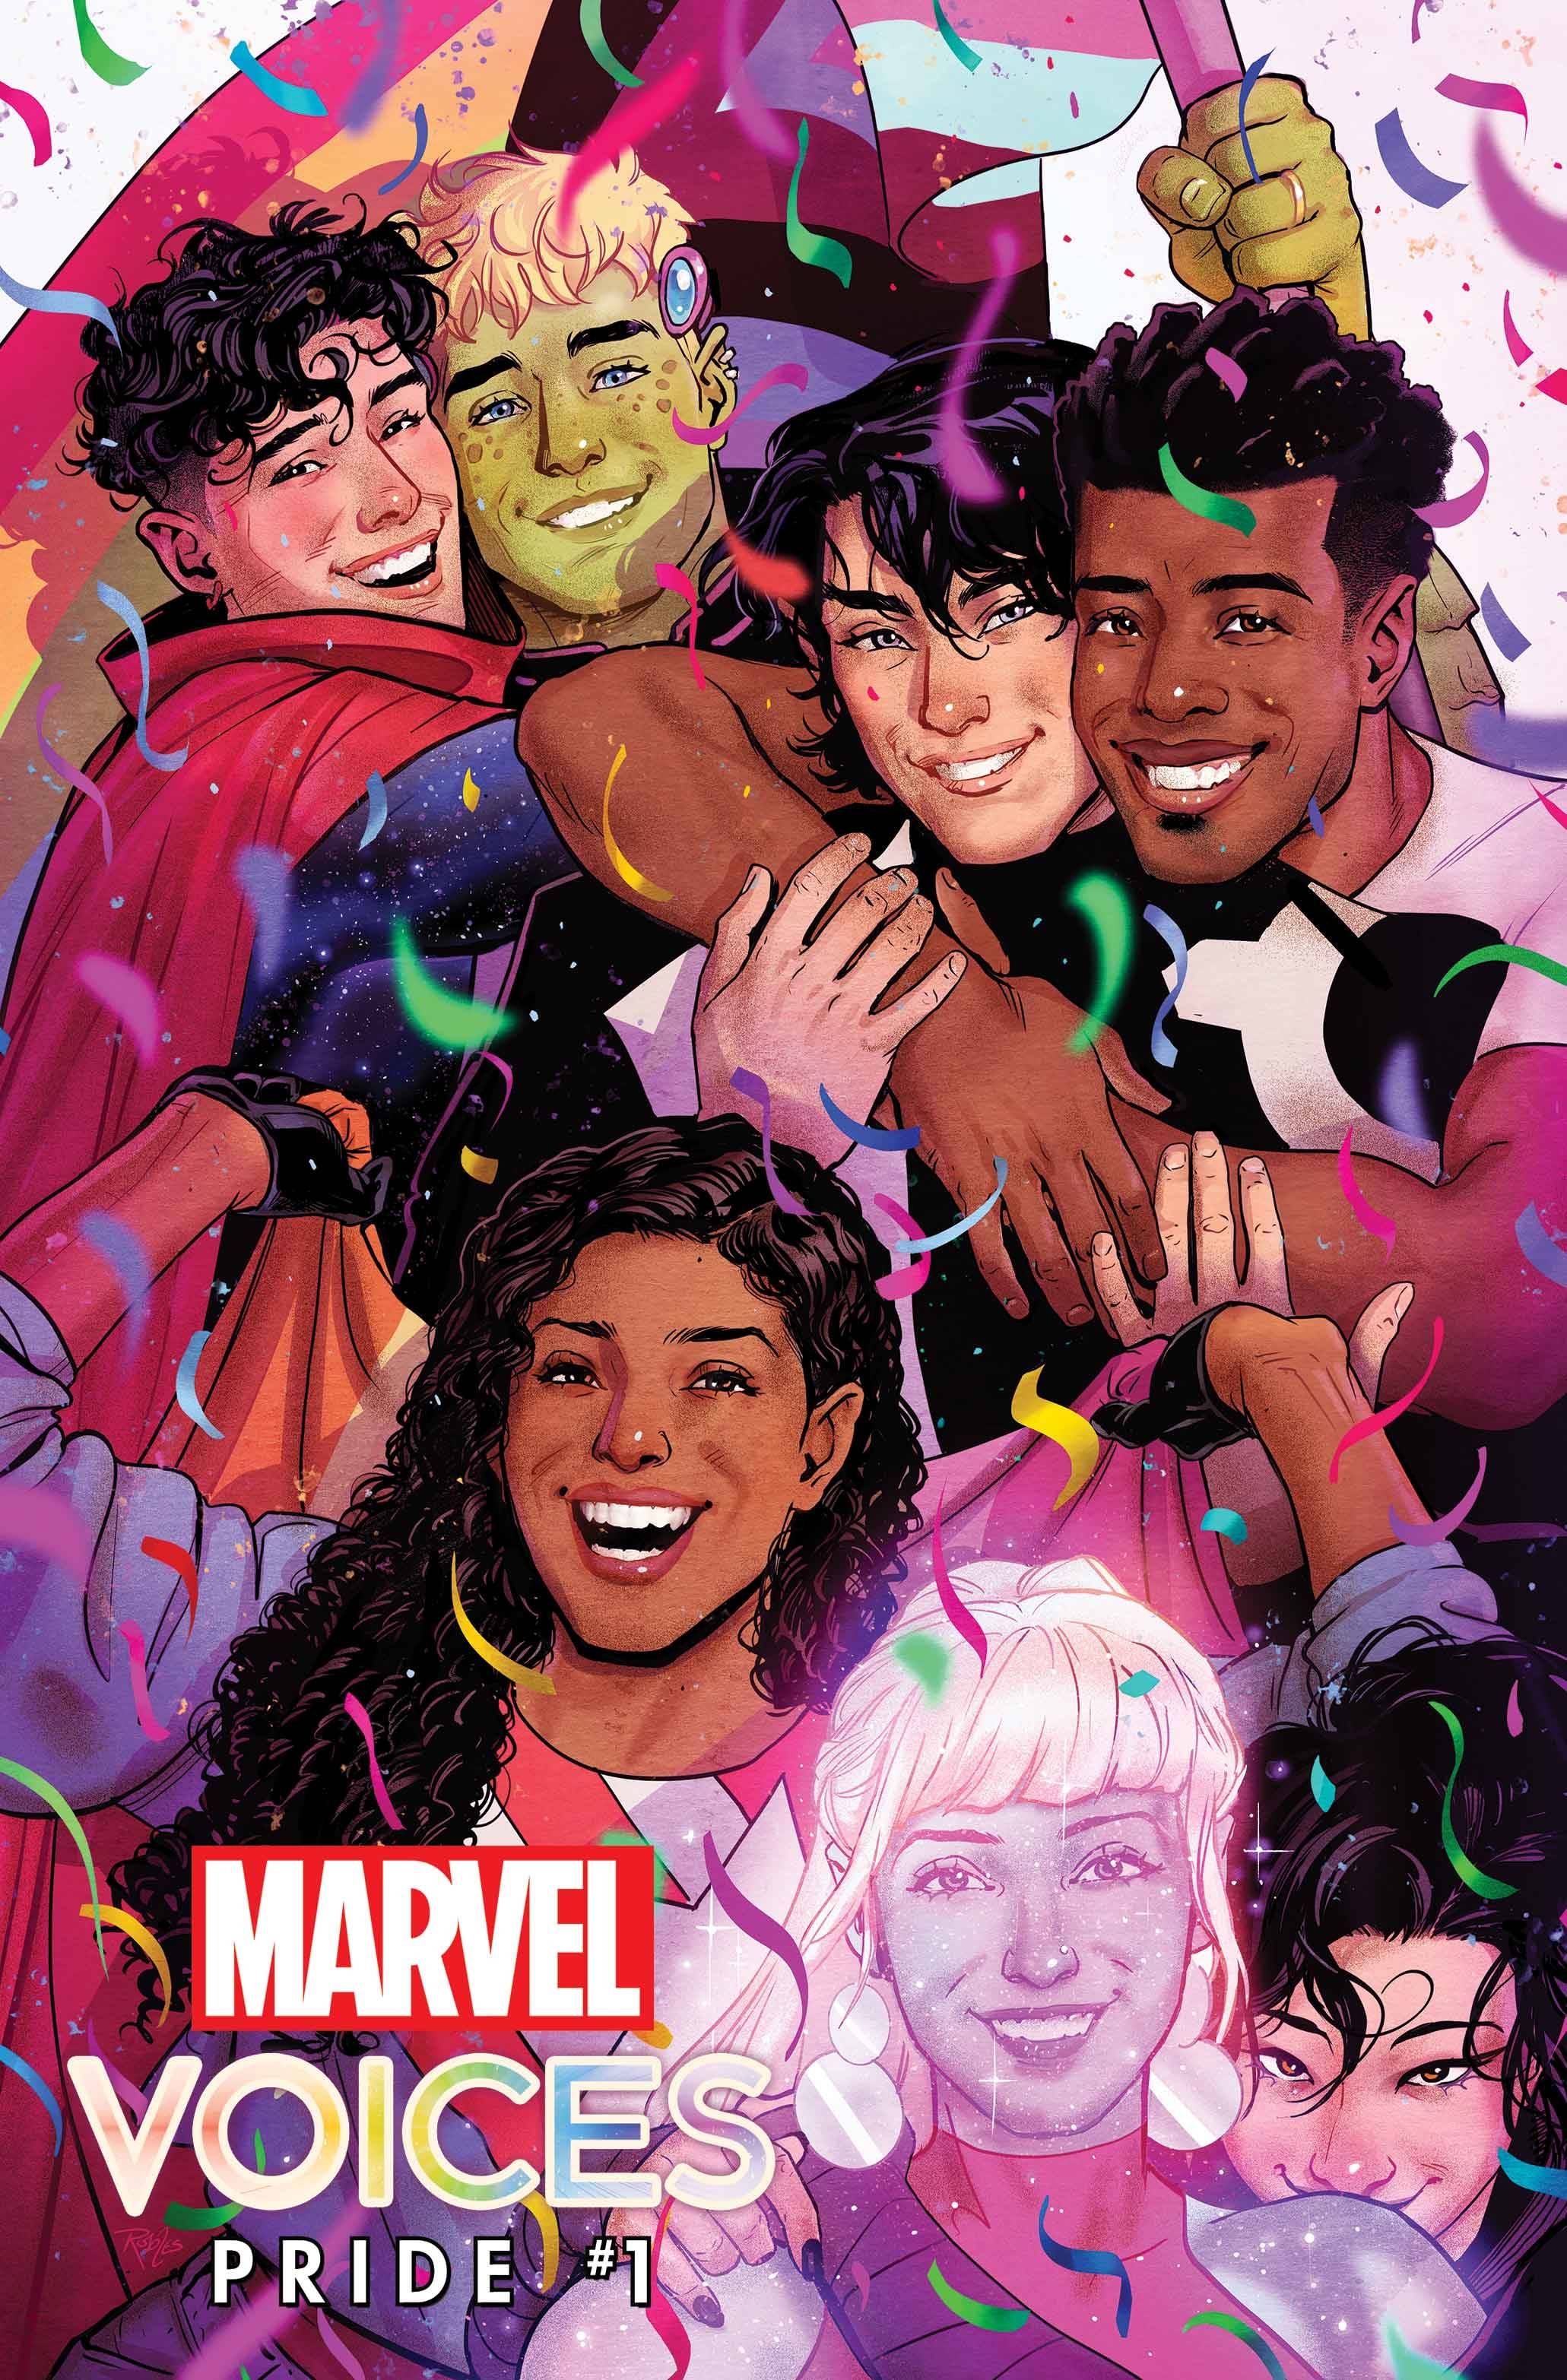 Marvels Voices Pride #1 Cover A